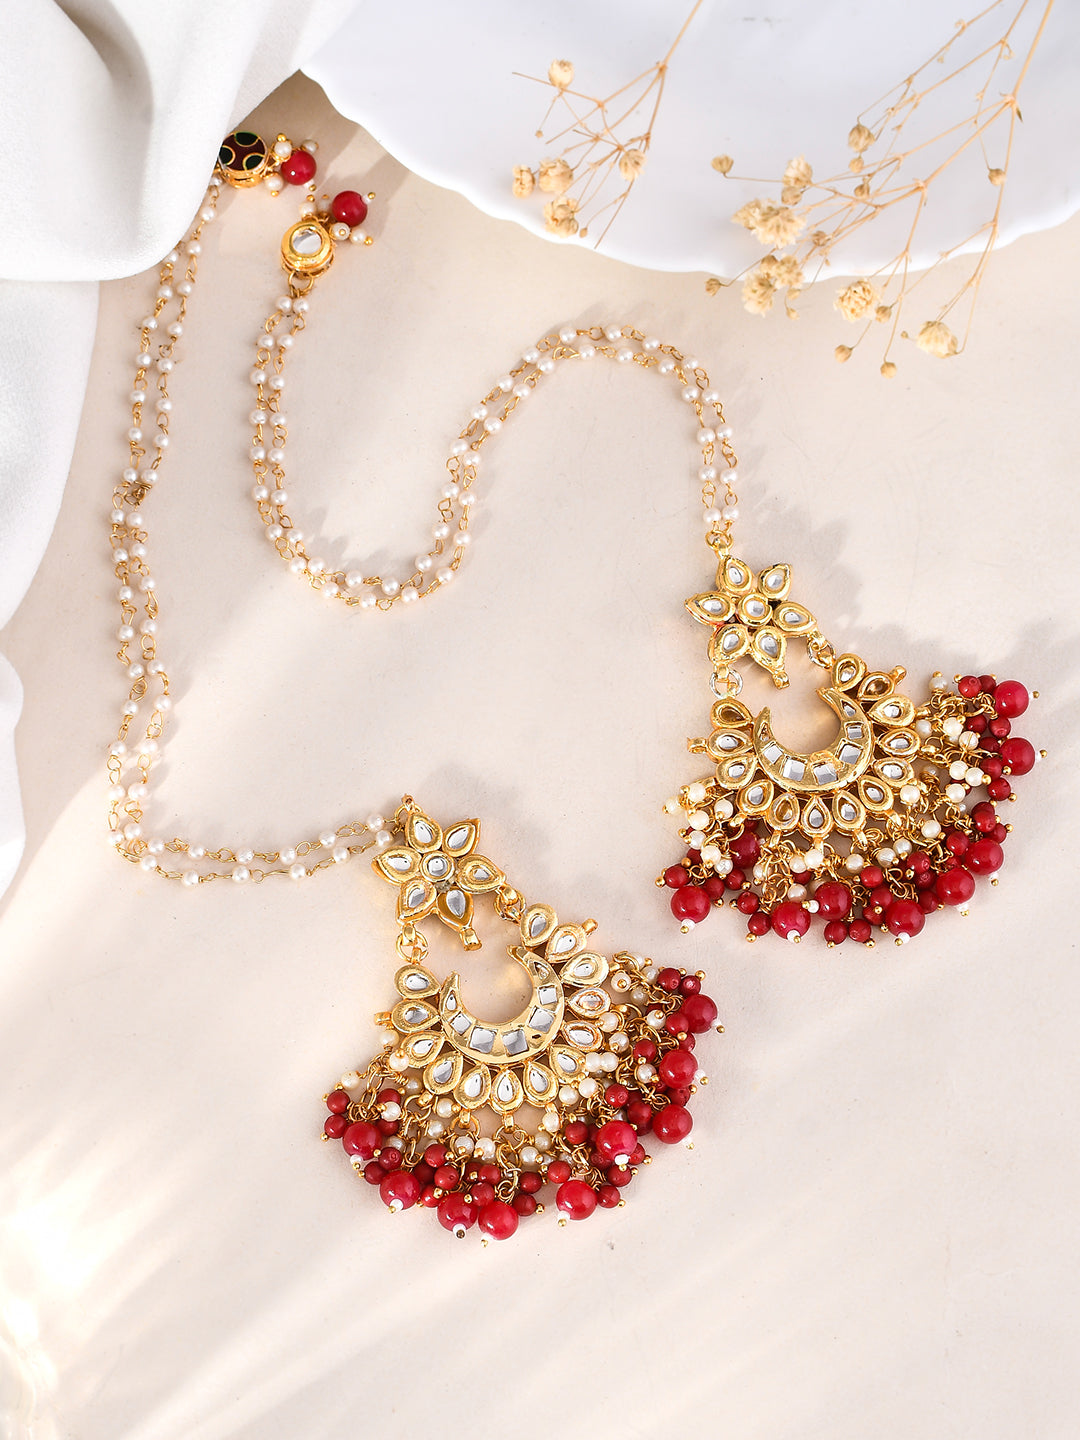 Elegant Gold-plated and Red Gemstone Long Drop Earrings for a Royal Look